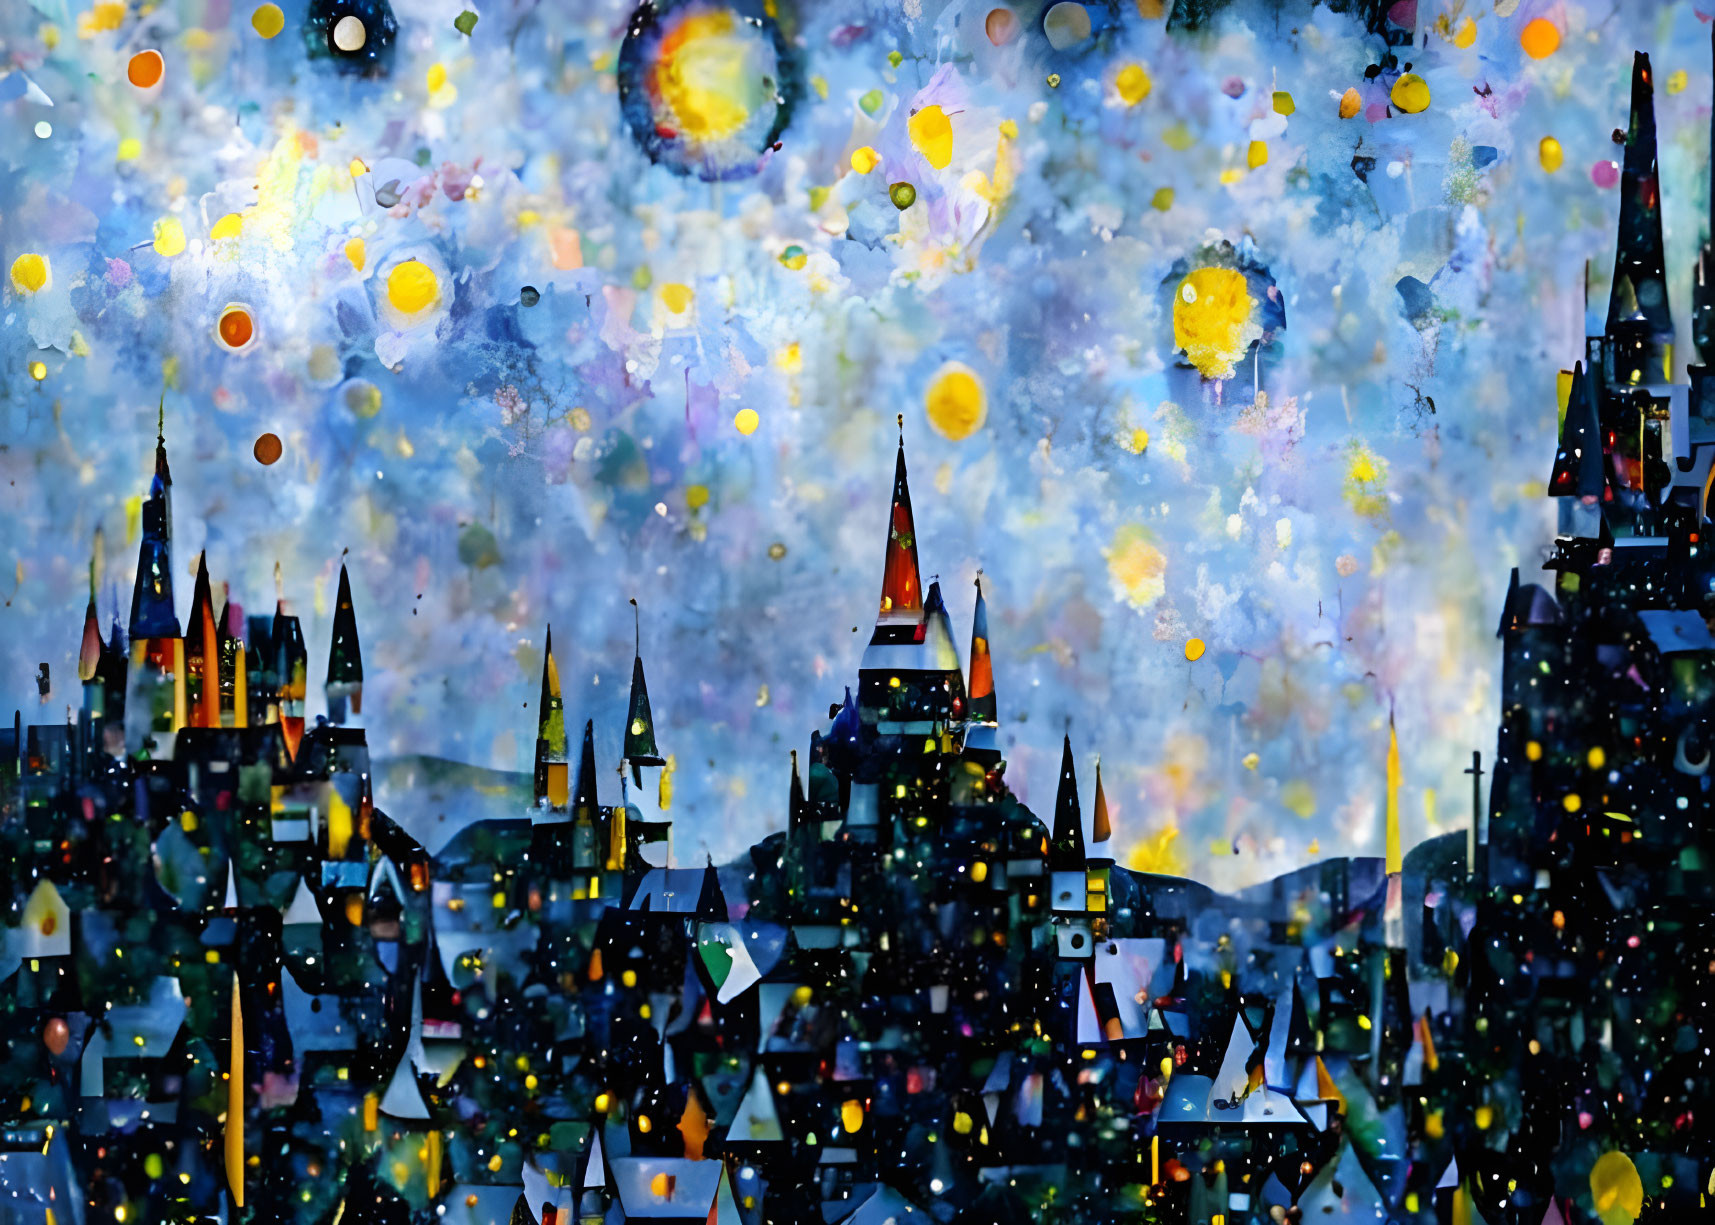 Vibrant starry night sky painting with colorful village silhouette